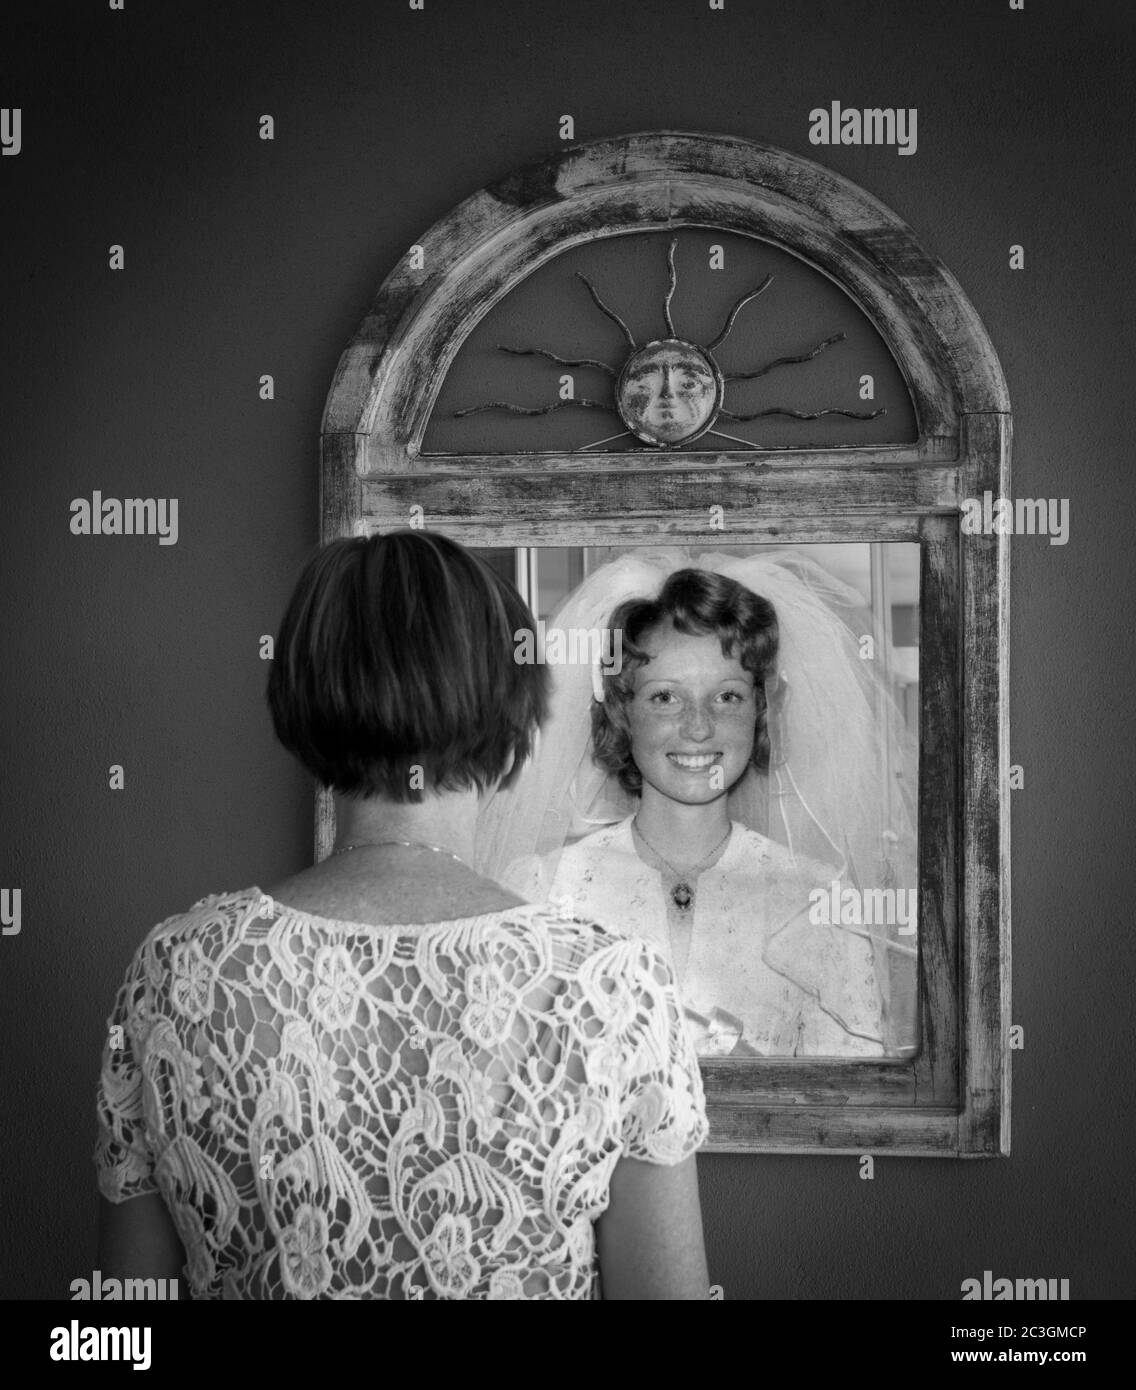 Older woman looking in mirror at younger reflection as a bride Stock Photo